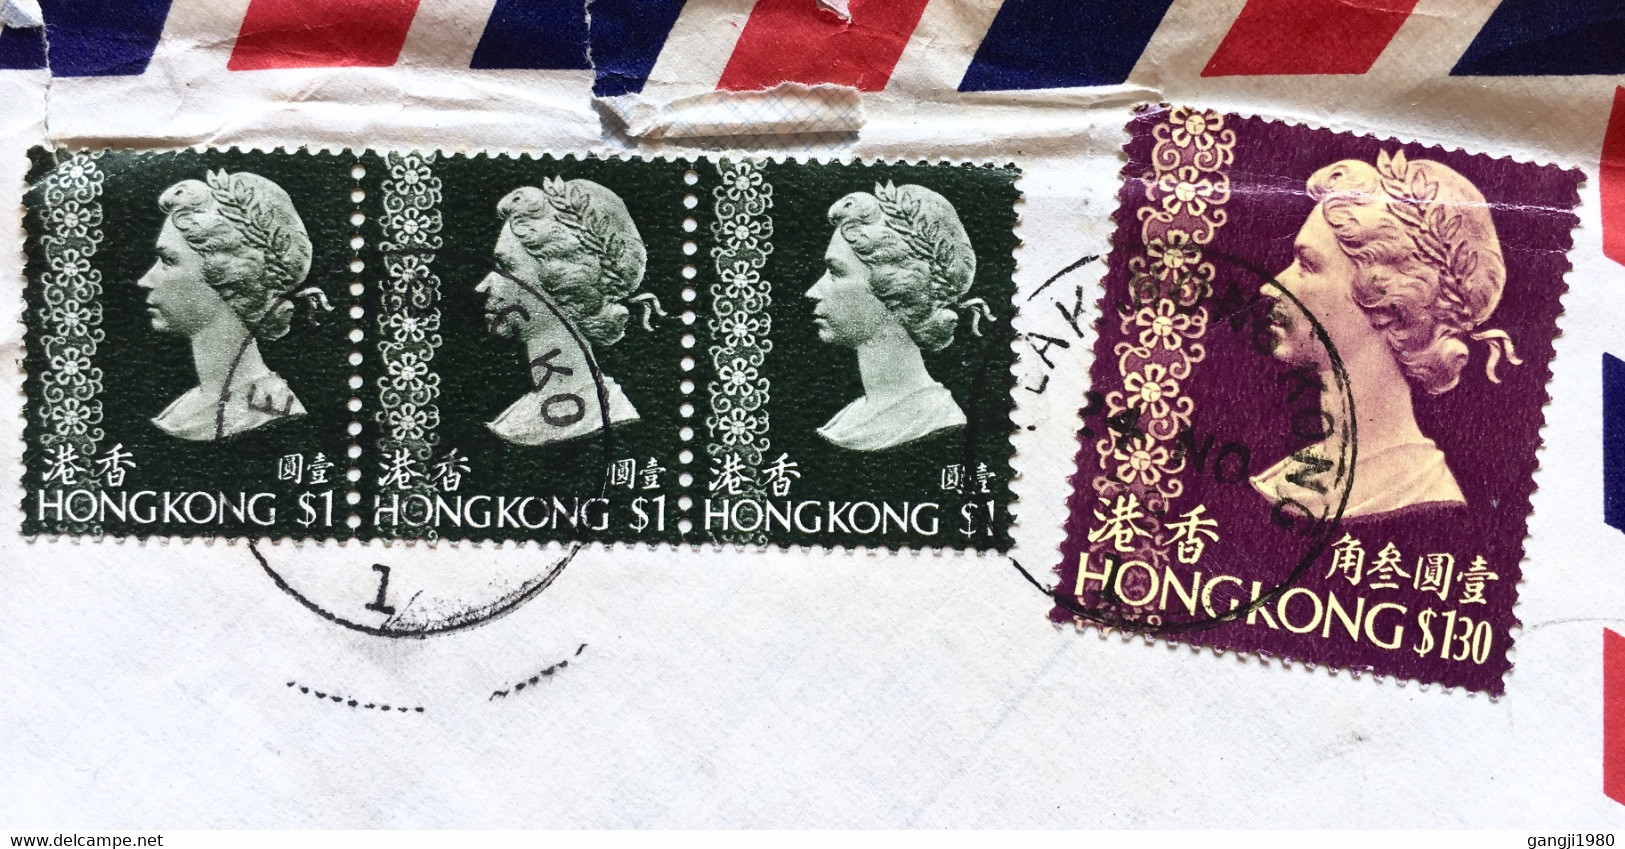 HONG KONG TO ENGLAND 1971, USED COVER, QUEEN 1$ 3 STAMPS, 1.30$ ONE STAMP, VIGNETTE EXPRESS LABEL, LAKE HONG KONG CANCEL - Cartas & Documentos